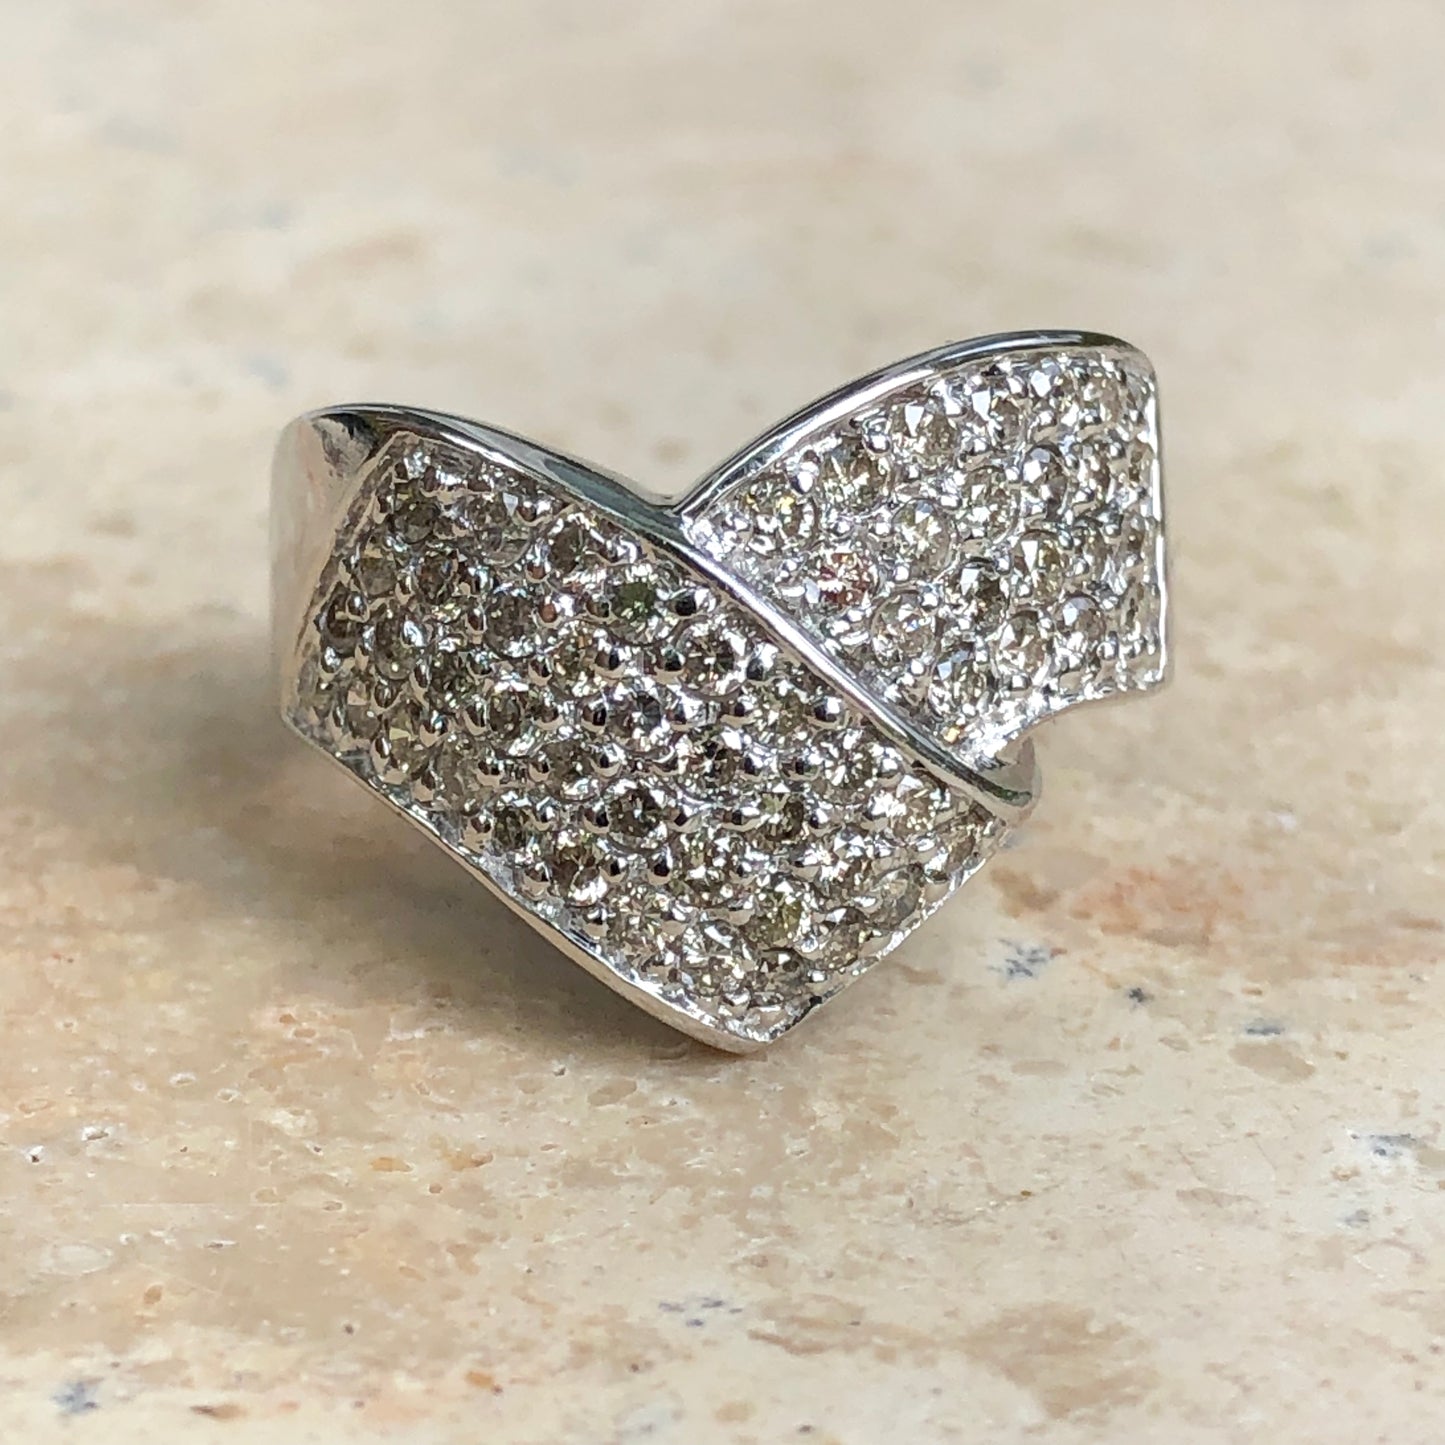 14KT White Gold + Pave Diamond Bypass Design Cigar Estate Ring Size 7 - Legacy Saint Jewelry